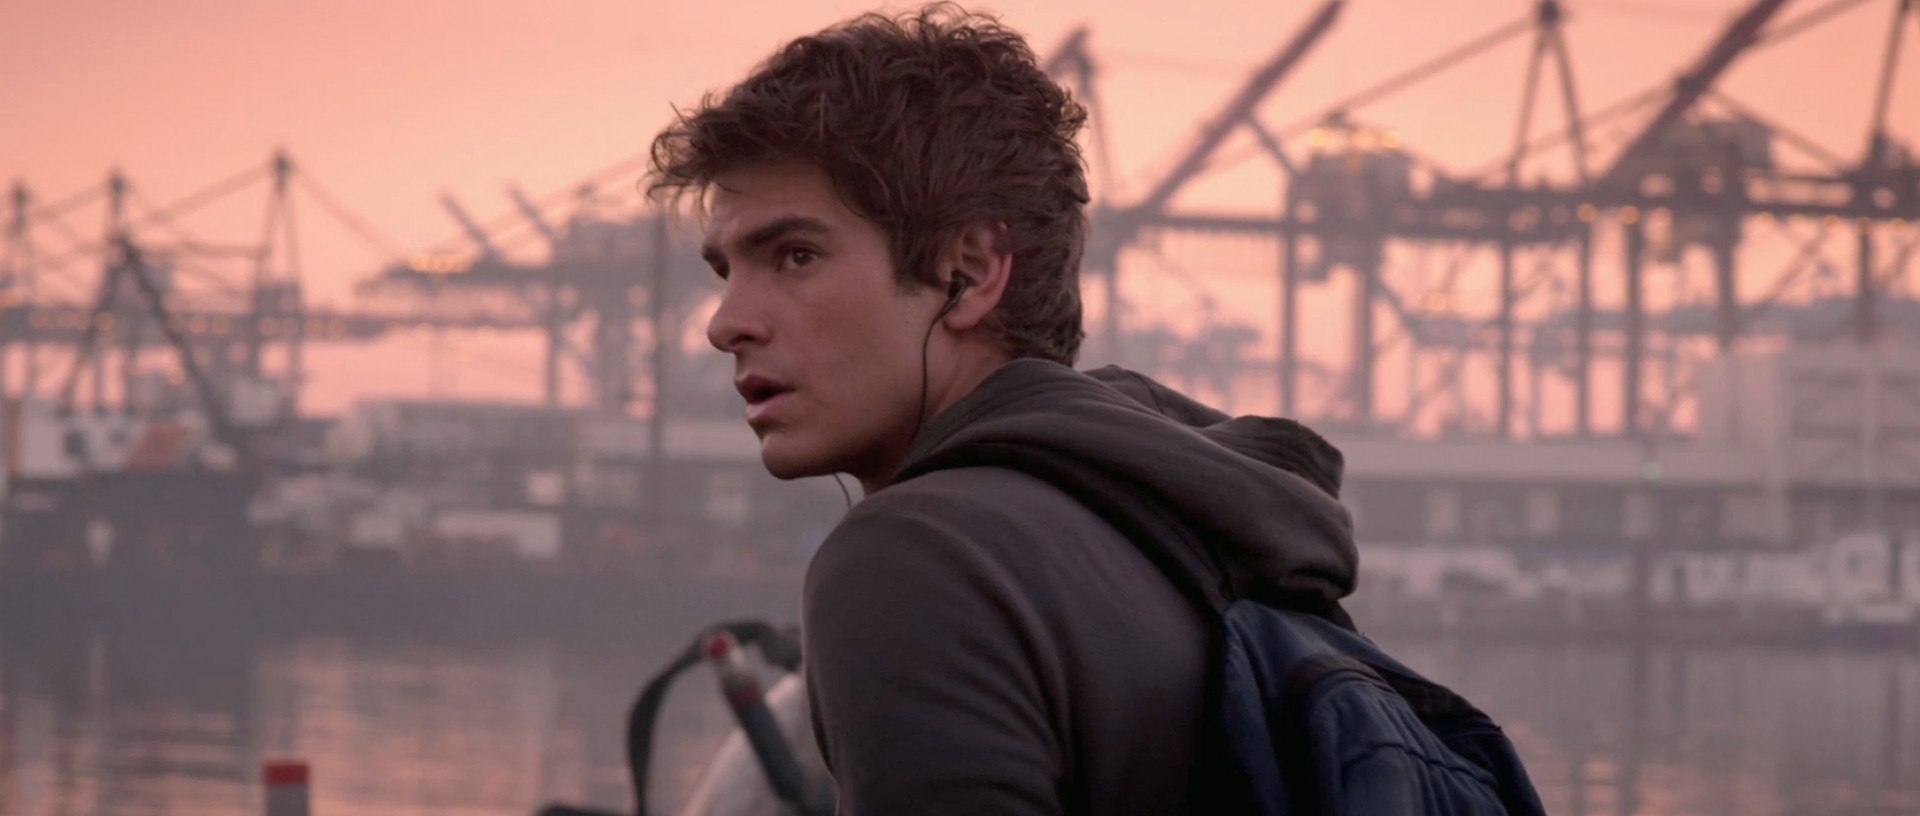 andrew garfield as peter parker in the amazing